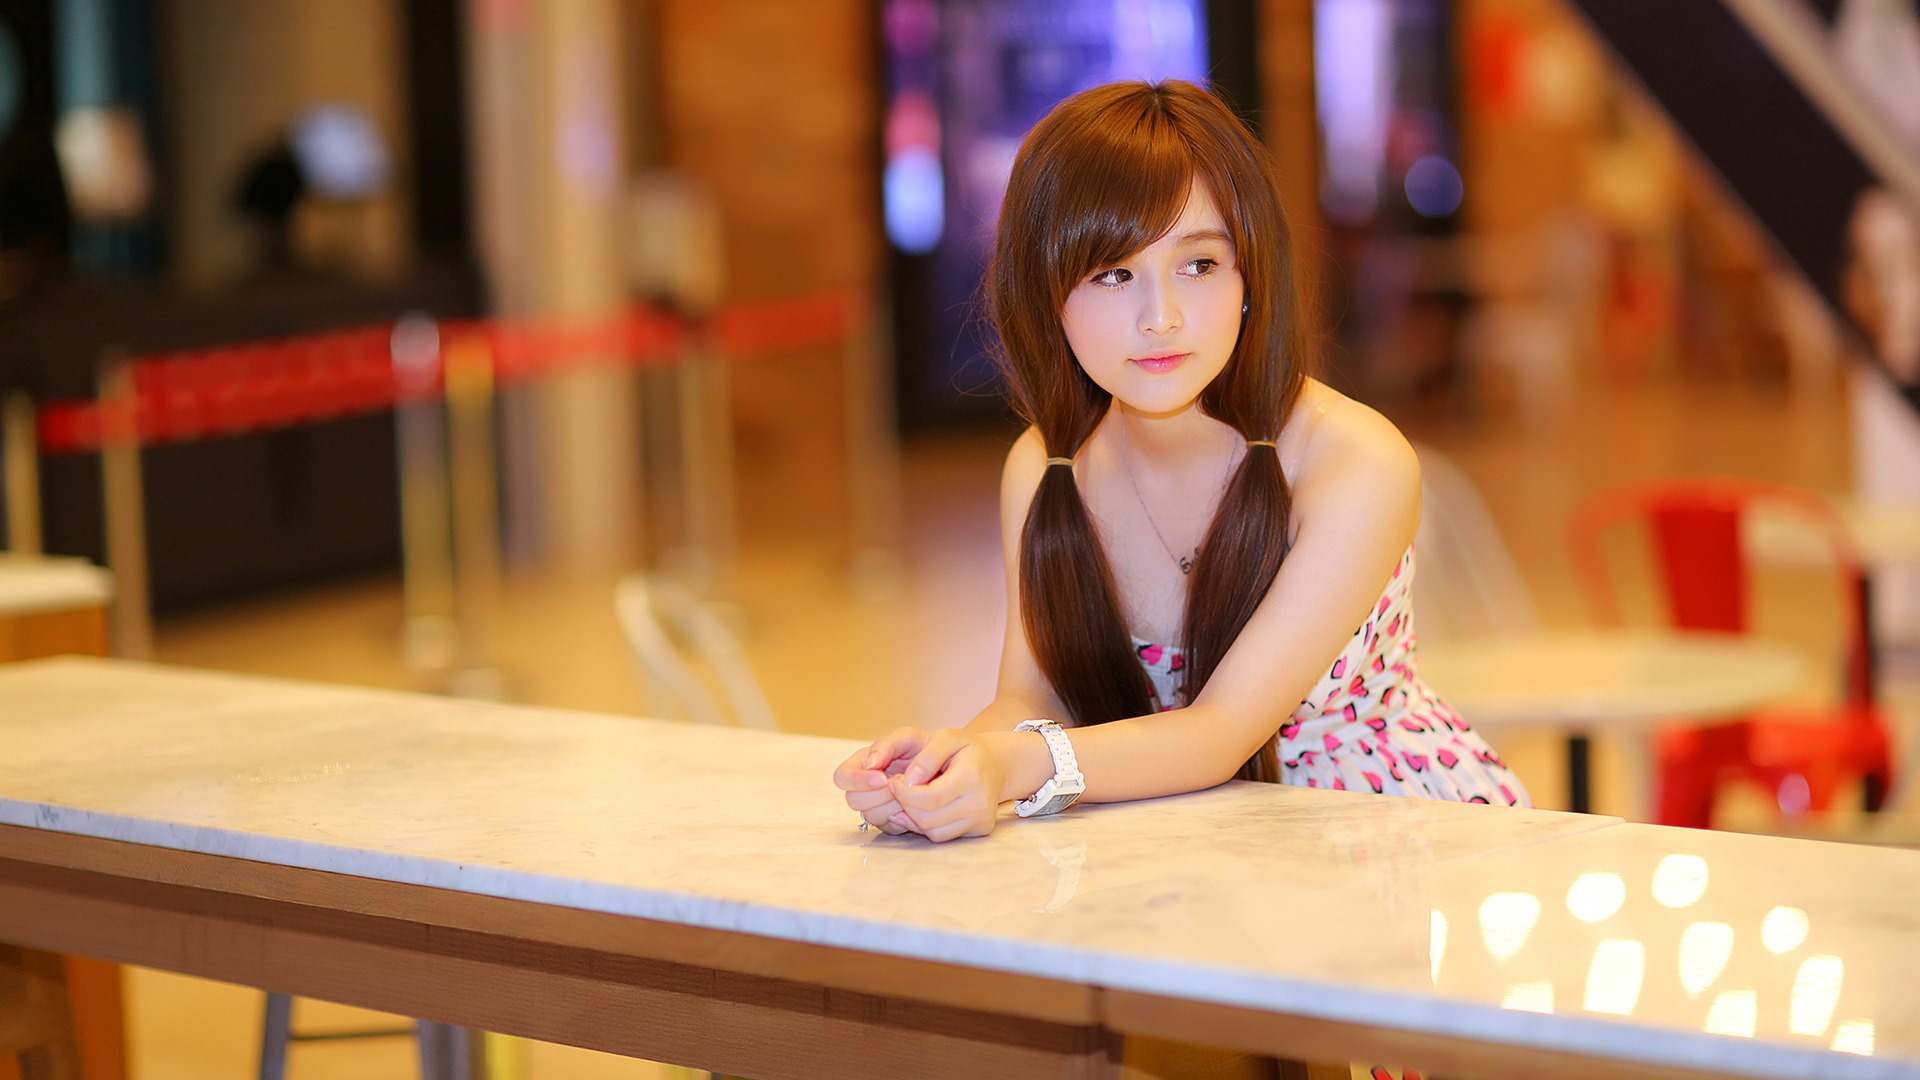 Pure and lovely young Asian girl HD wallpapers collection (2) #38 - 1920x1080